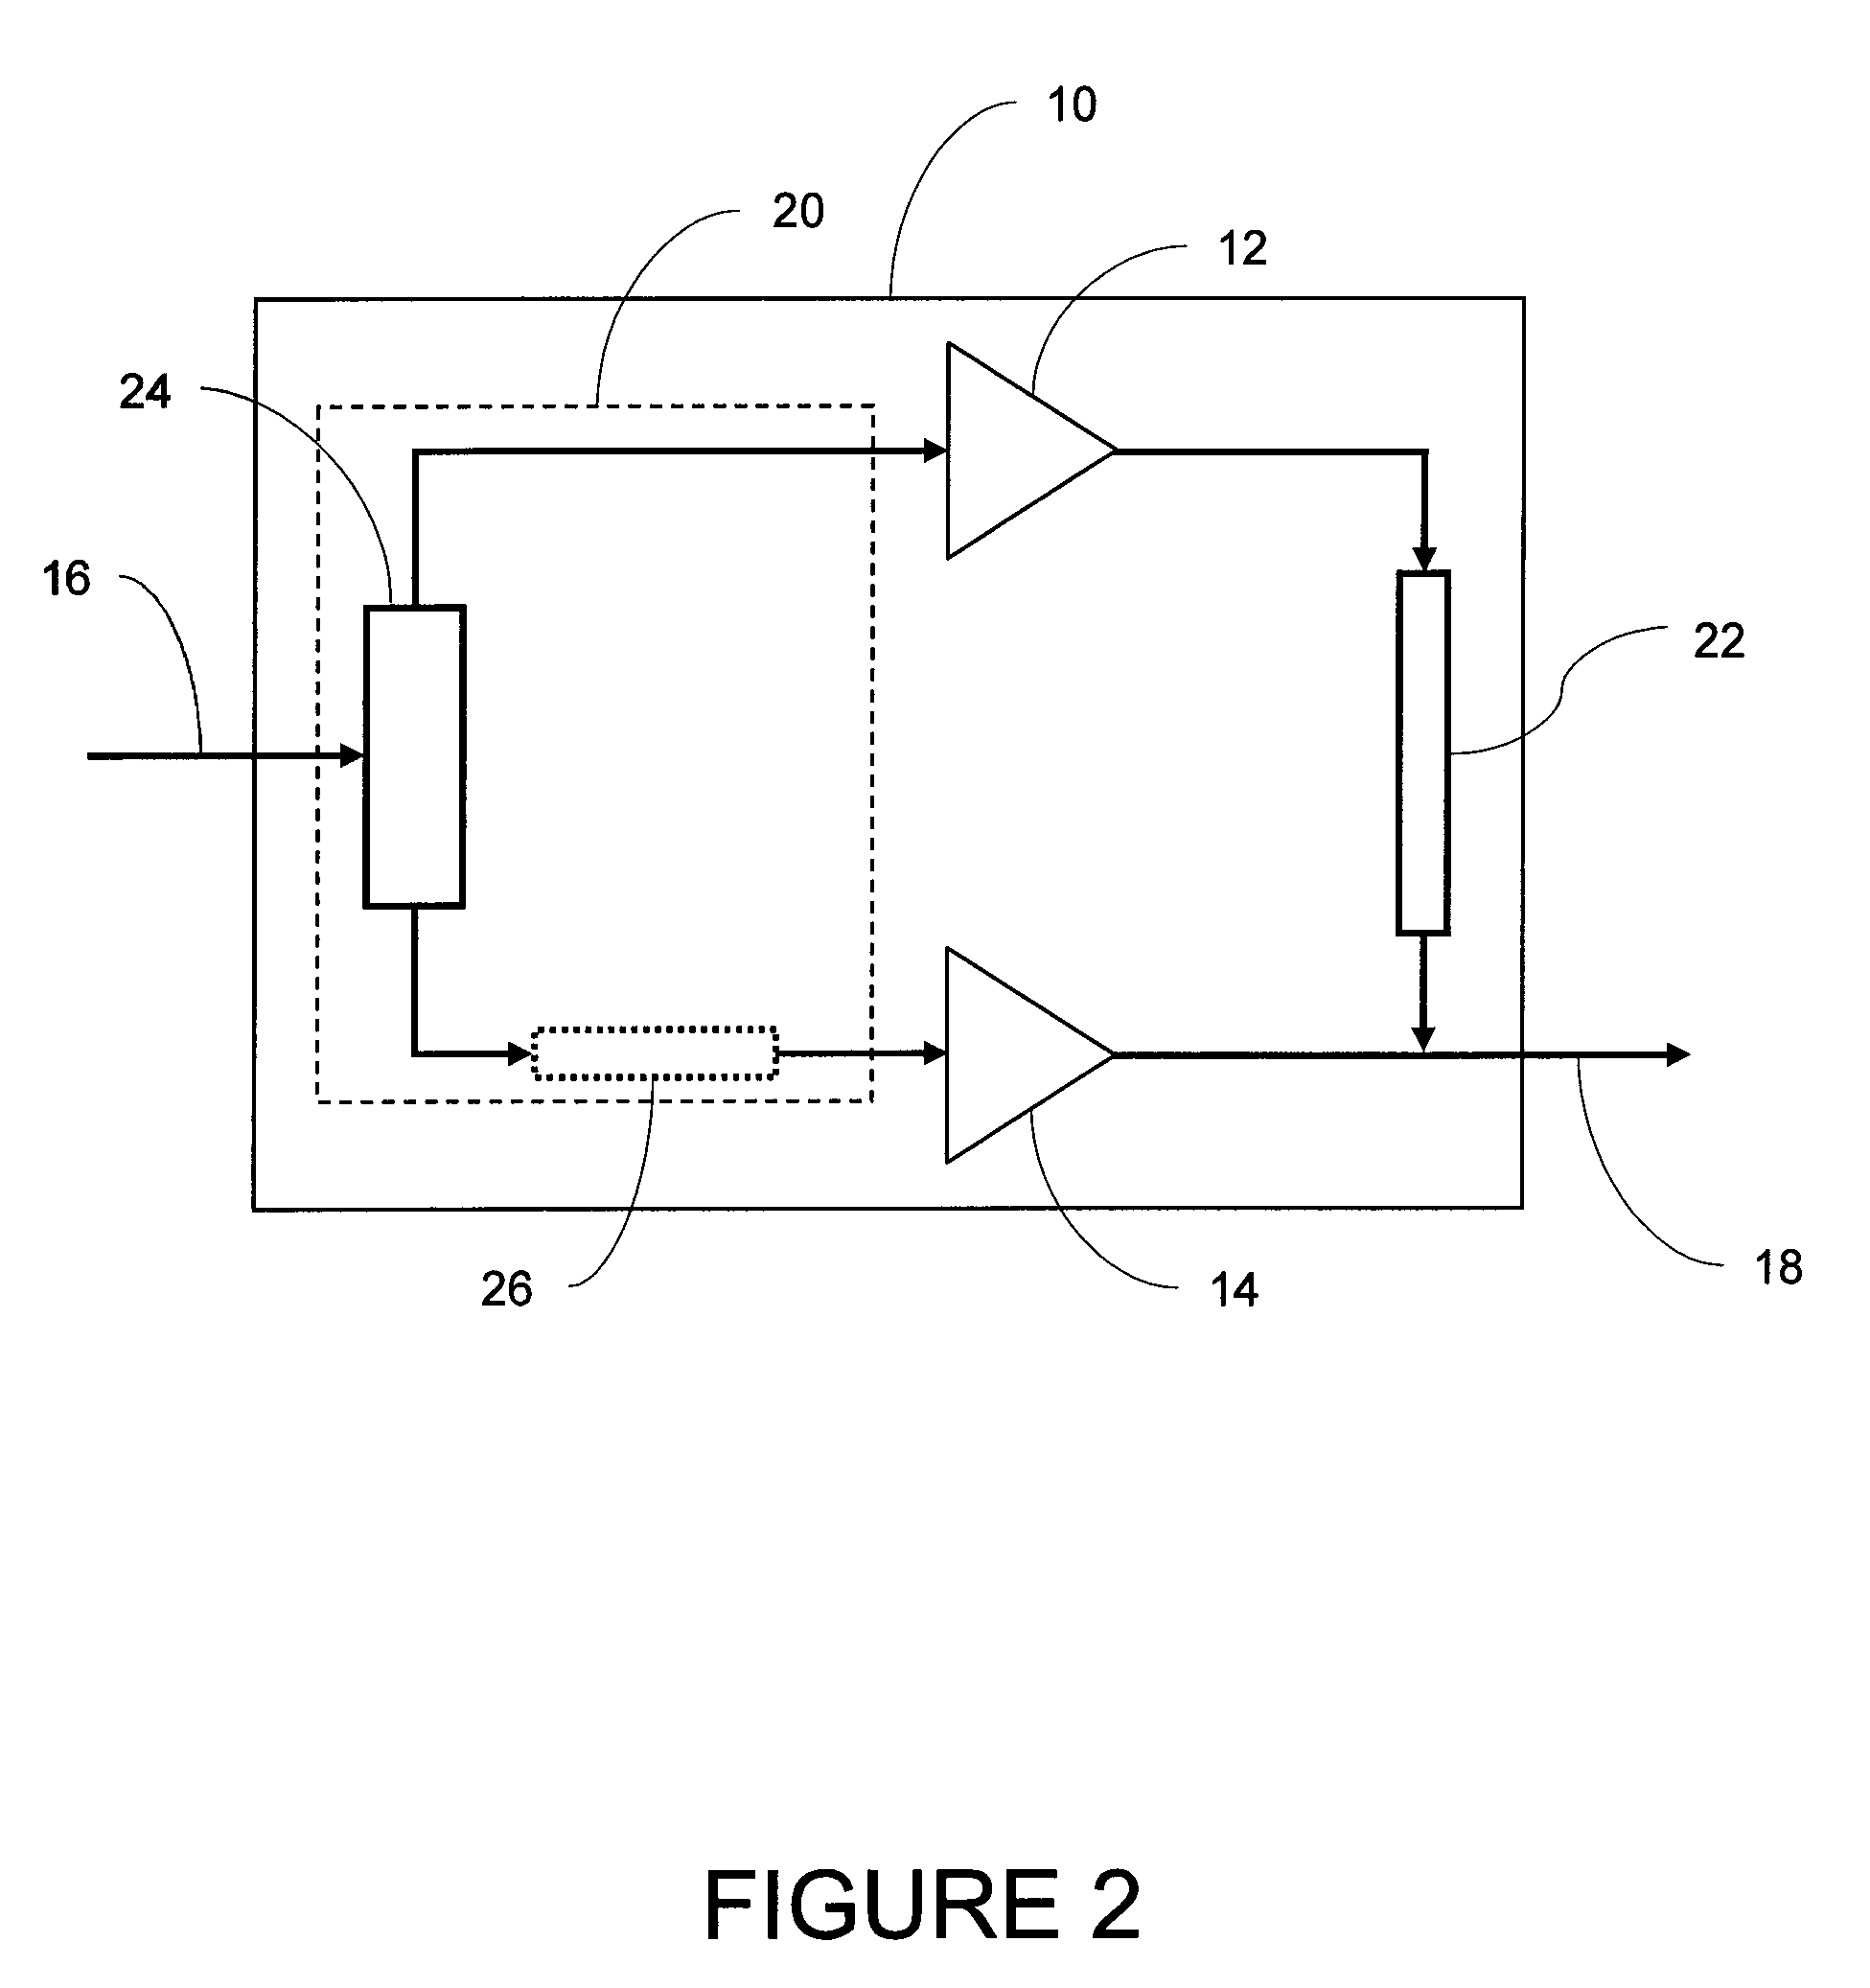 Enhanced amplifier with auxiliary path bias modulation